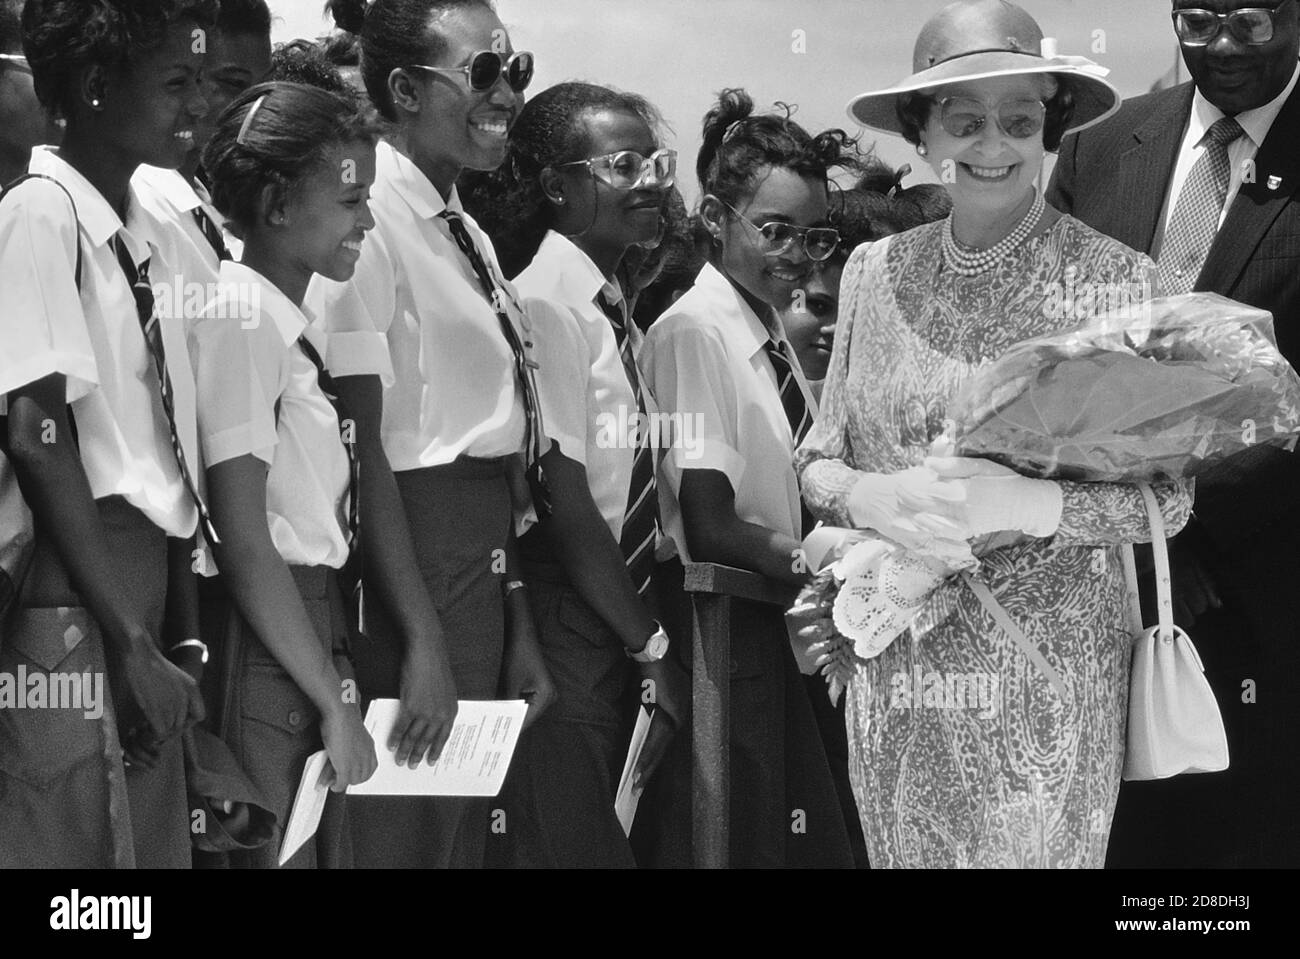 A line of local students and pupils greet a smiling HRH Queen Elizabeth II on her visit to Queen's College. The Queen was on her final visit to the Caribbean Island of Barbados. March 8, 1989. Stock Photo